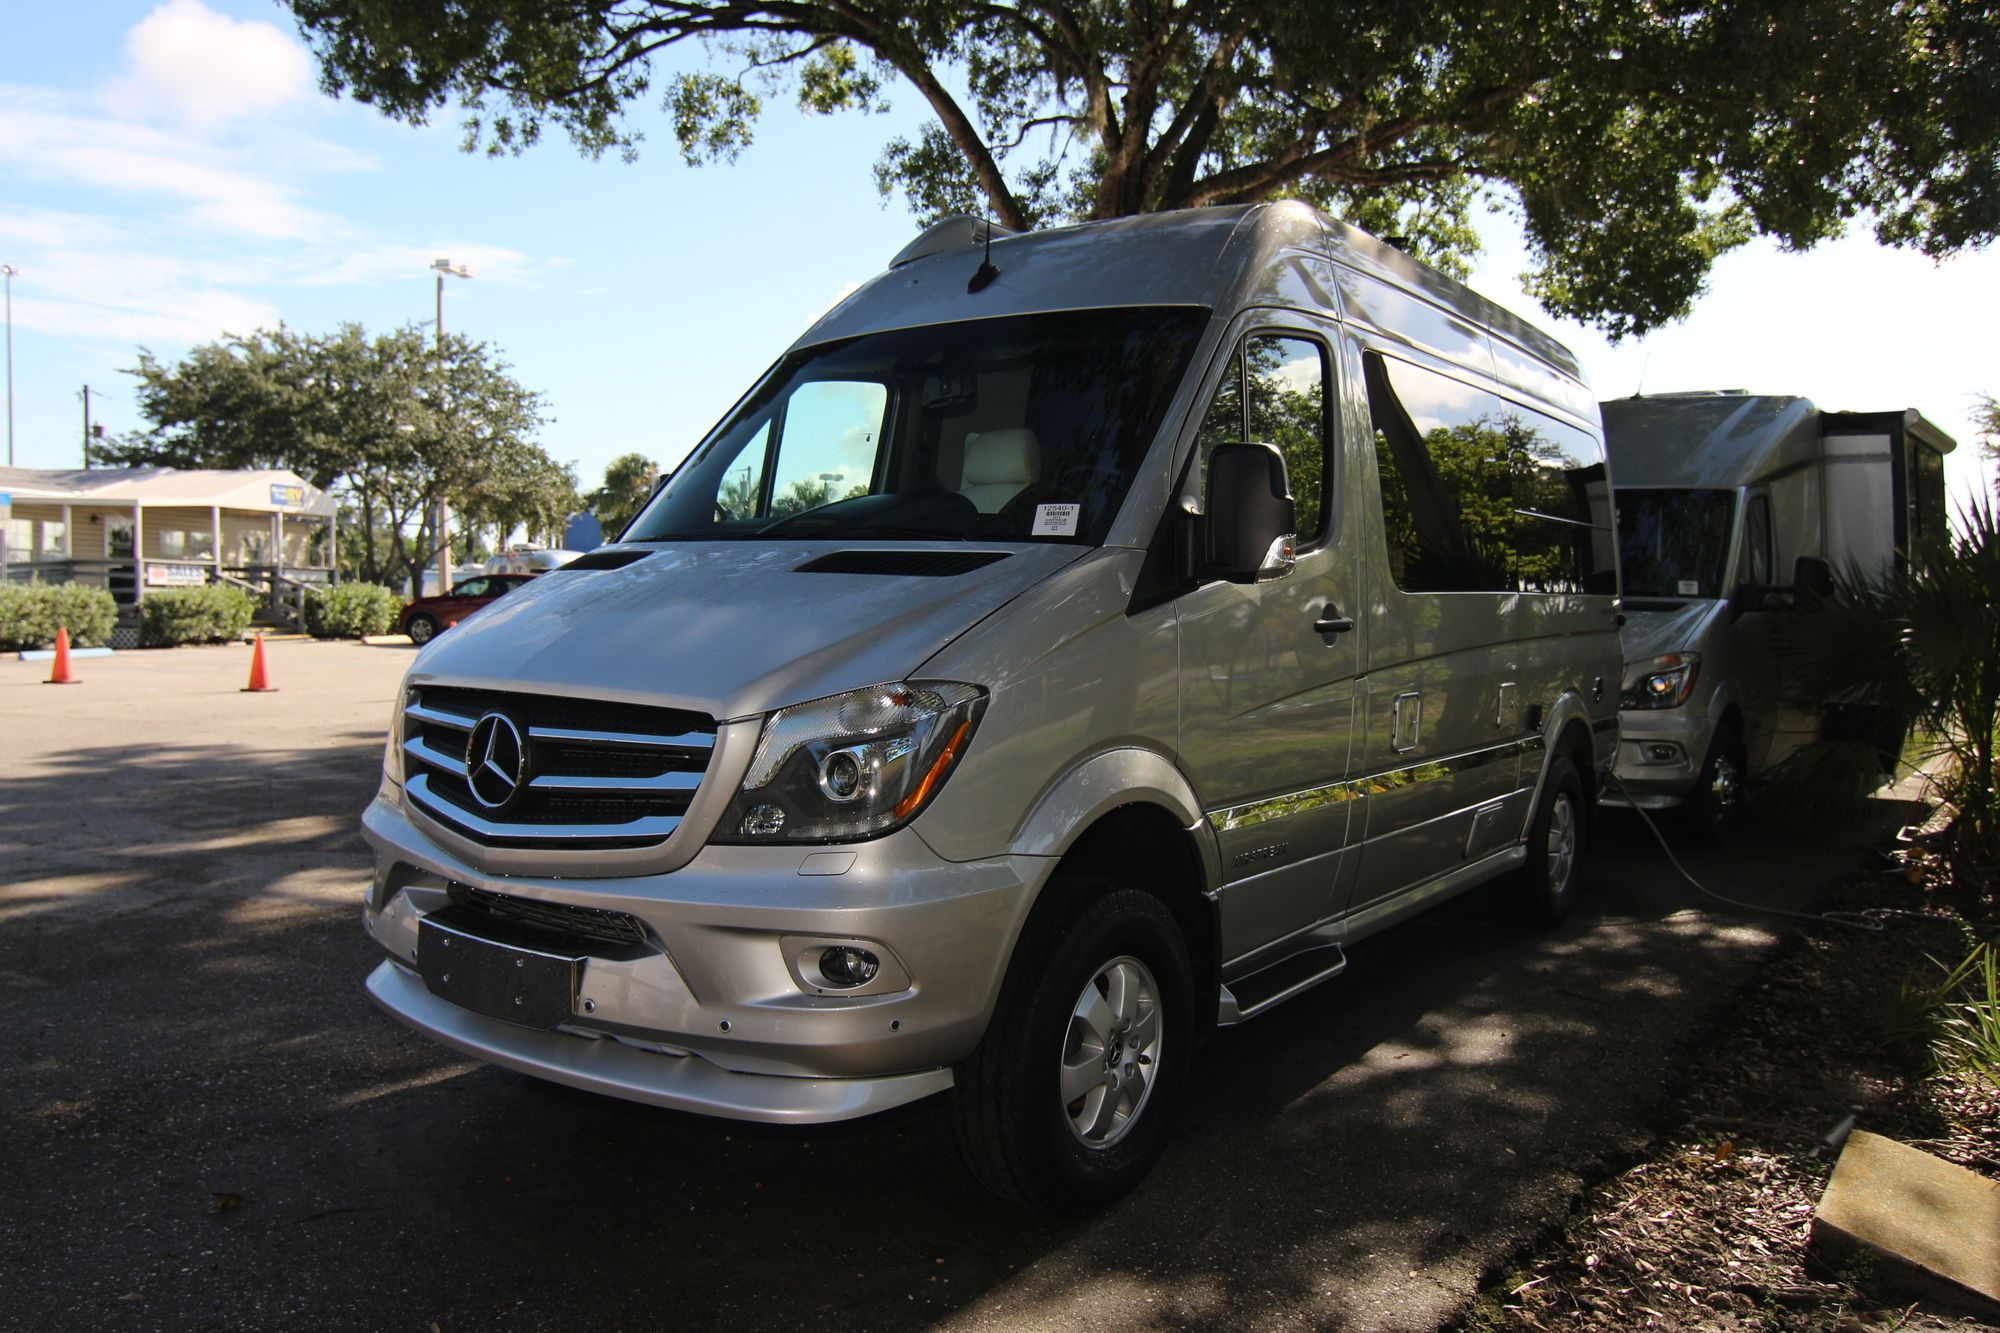 Used 2019 Airstream Interstate 4X4 Class B  For Sale